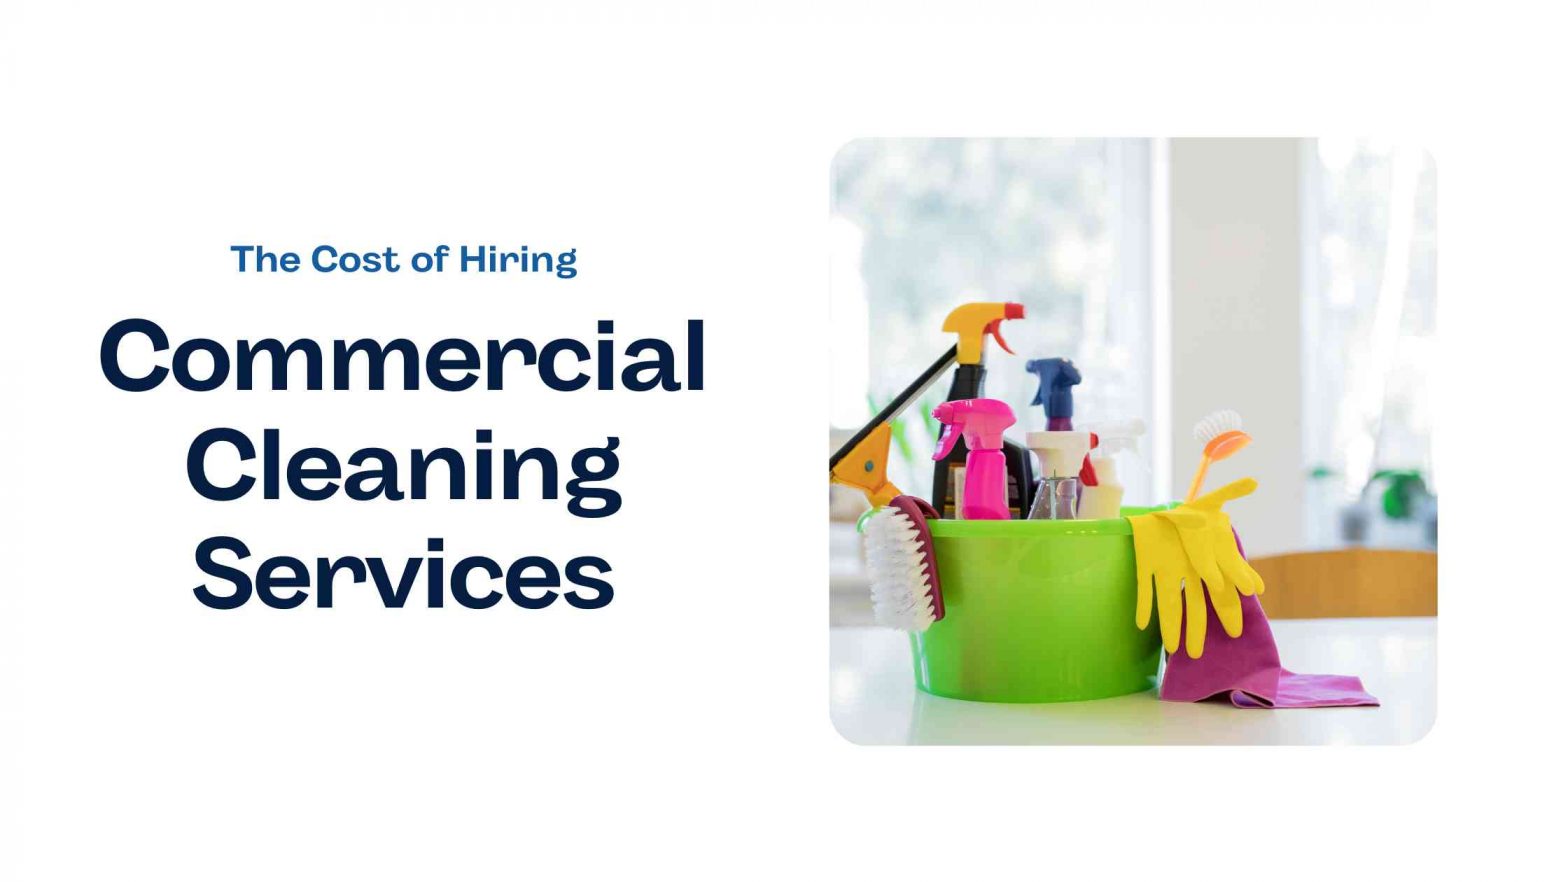 Hiring Commercial Cleaning Services